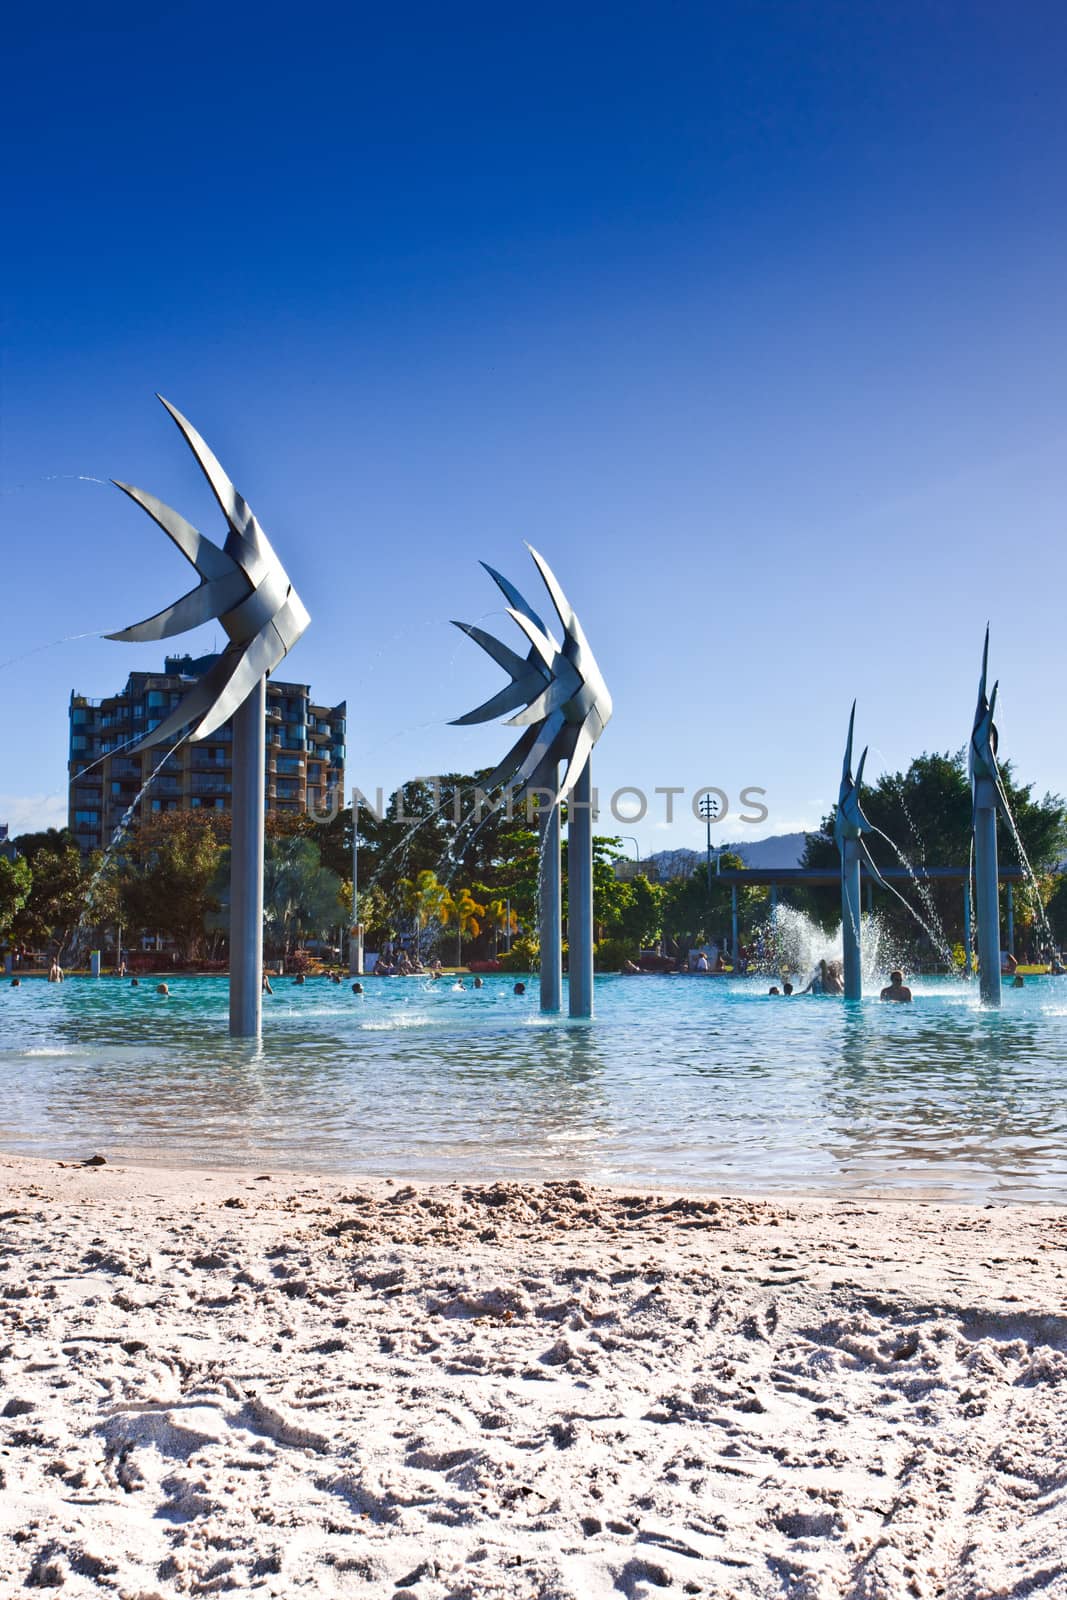 Beach and Fish Sculptures in Cairns by jrstock